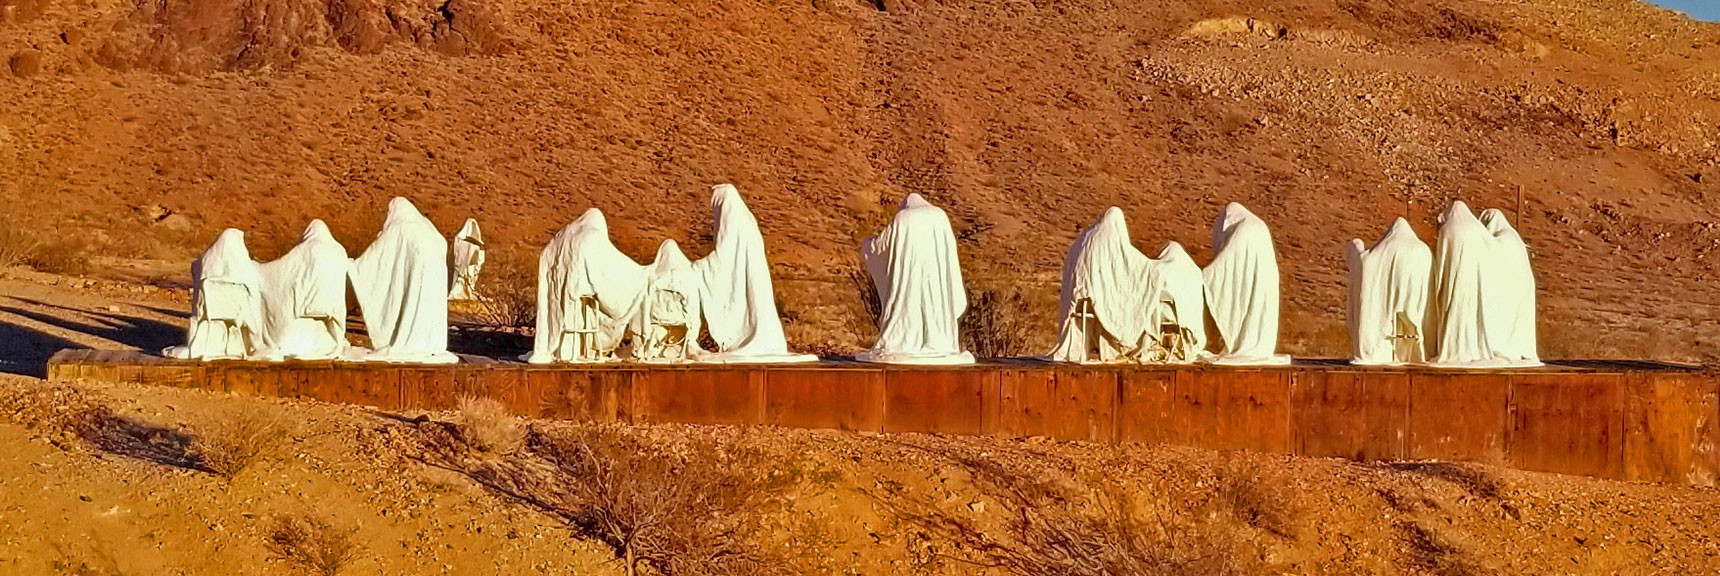 Last Supper Sculpture at Goldwell Open Air Museum | Rhyolite Ghost Town | Death Valley Area, Nevada